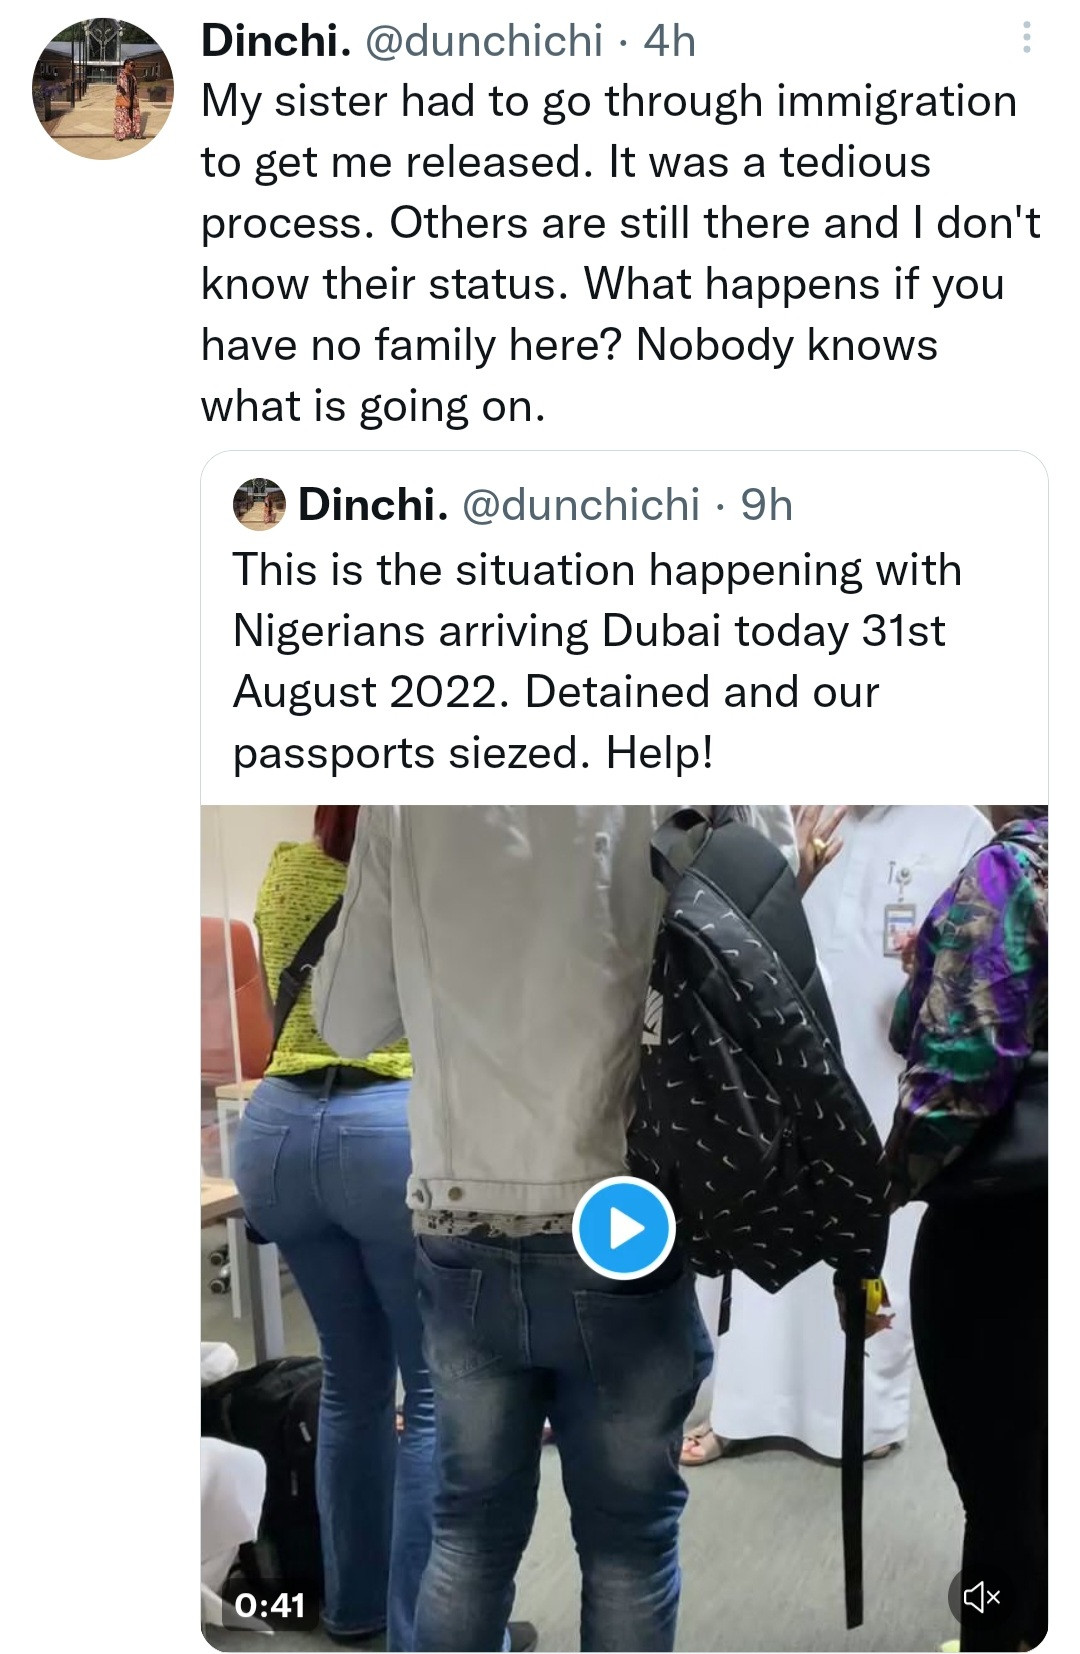 Nigerians arriving Dubai are detained and their passports seized (video)